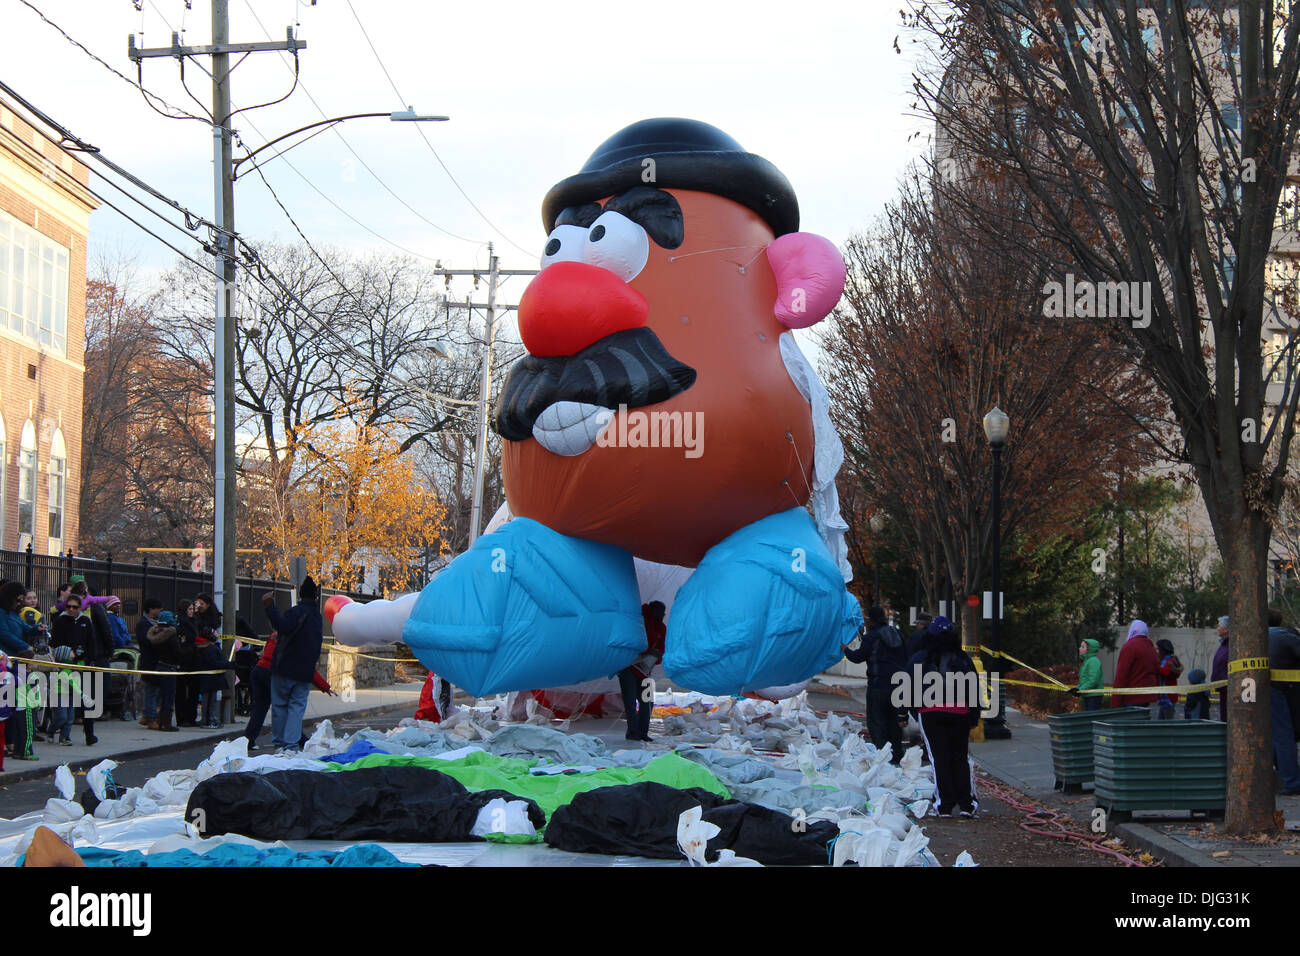 STAMFORD, CT - NOVEMBER 23, 2013: Mr. Potato Head is being inflated in the preparation for the yearly UBS Parade Spectacular on Stock Photo